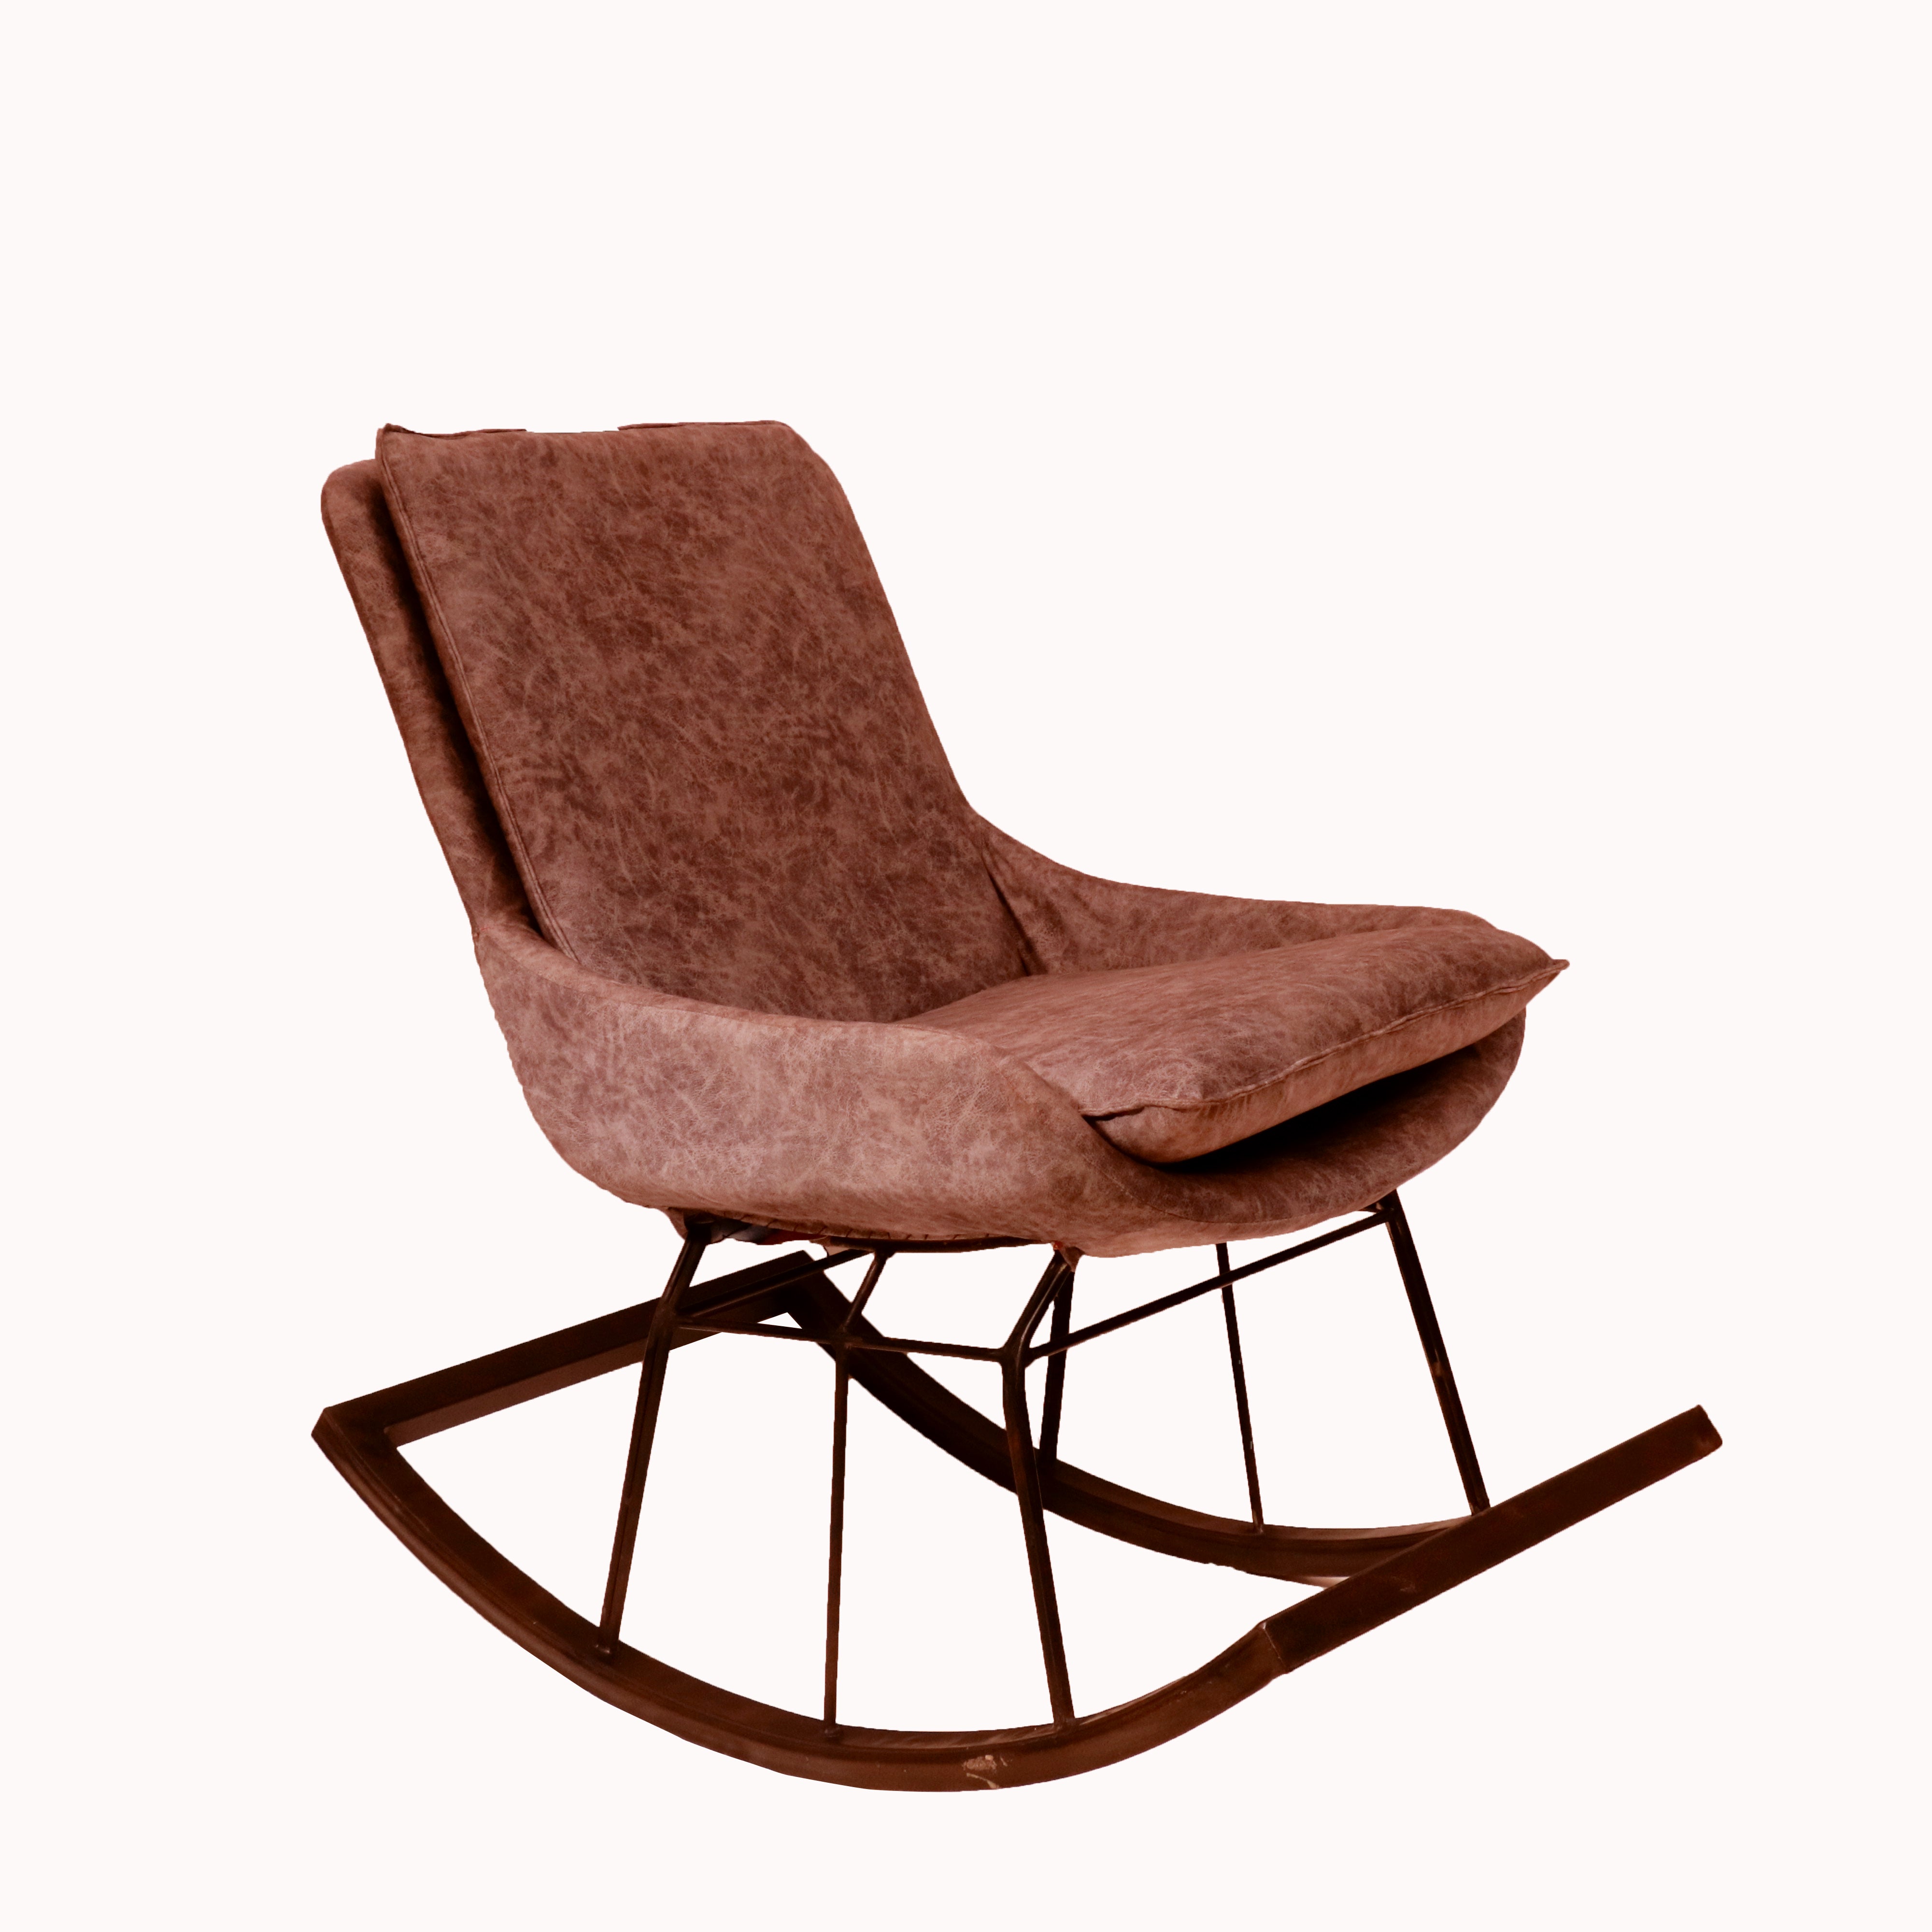 Upholstered Rocking Chair Rocking Chair